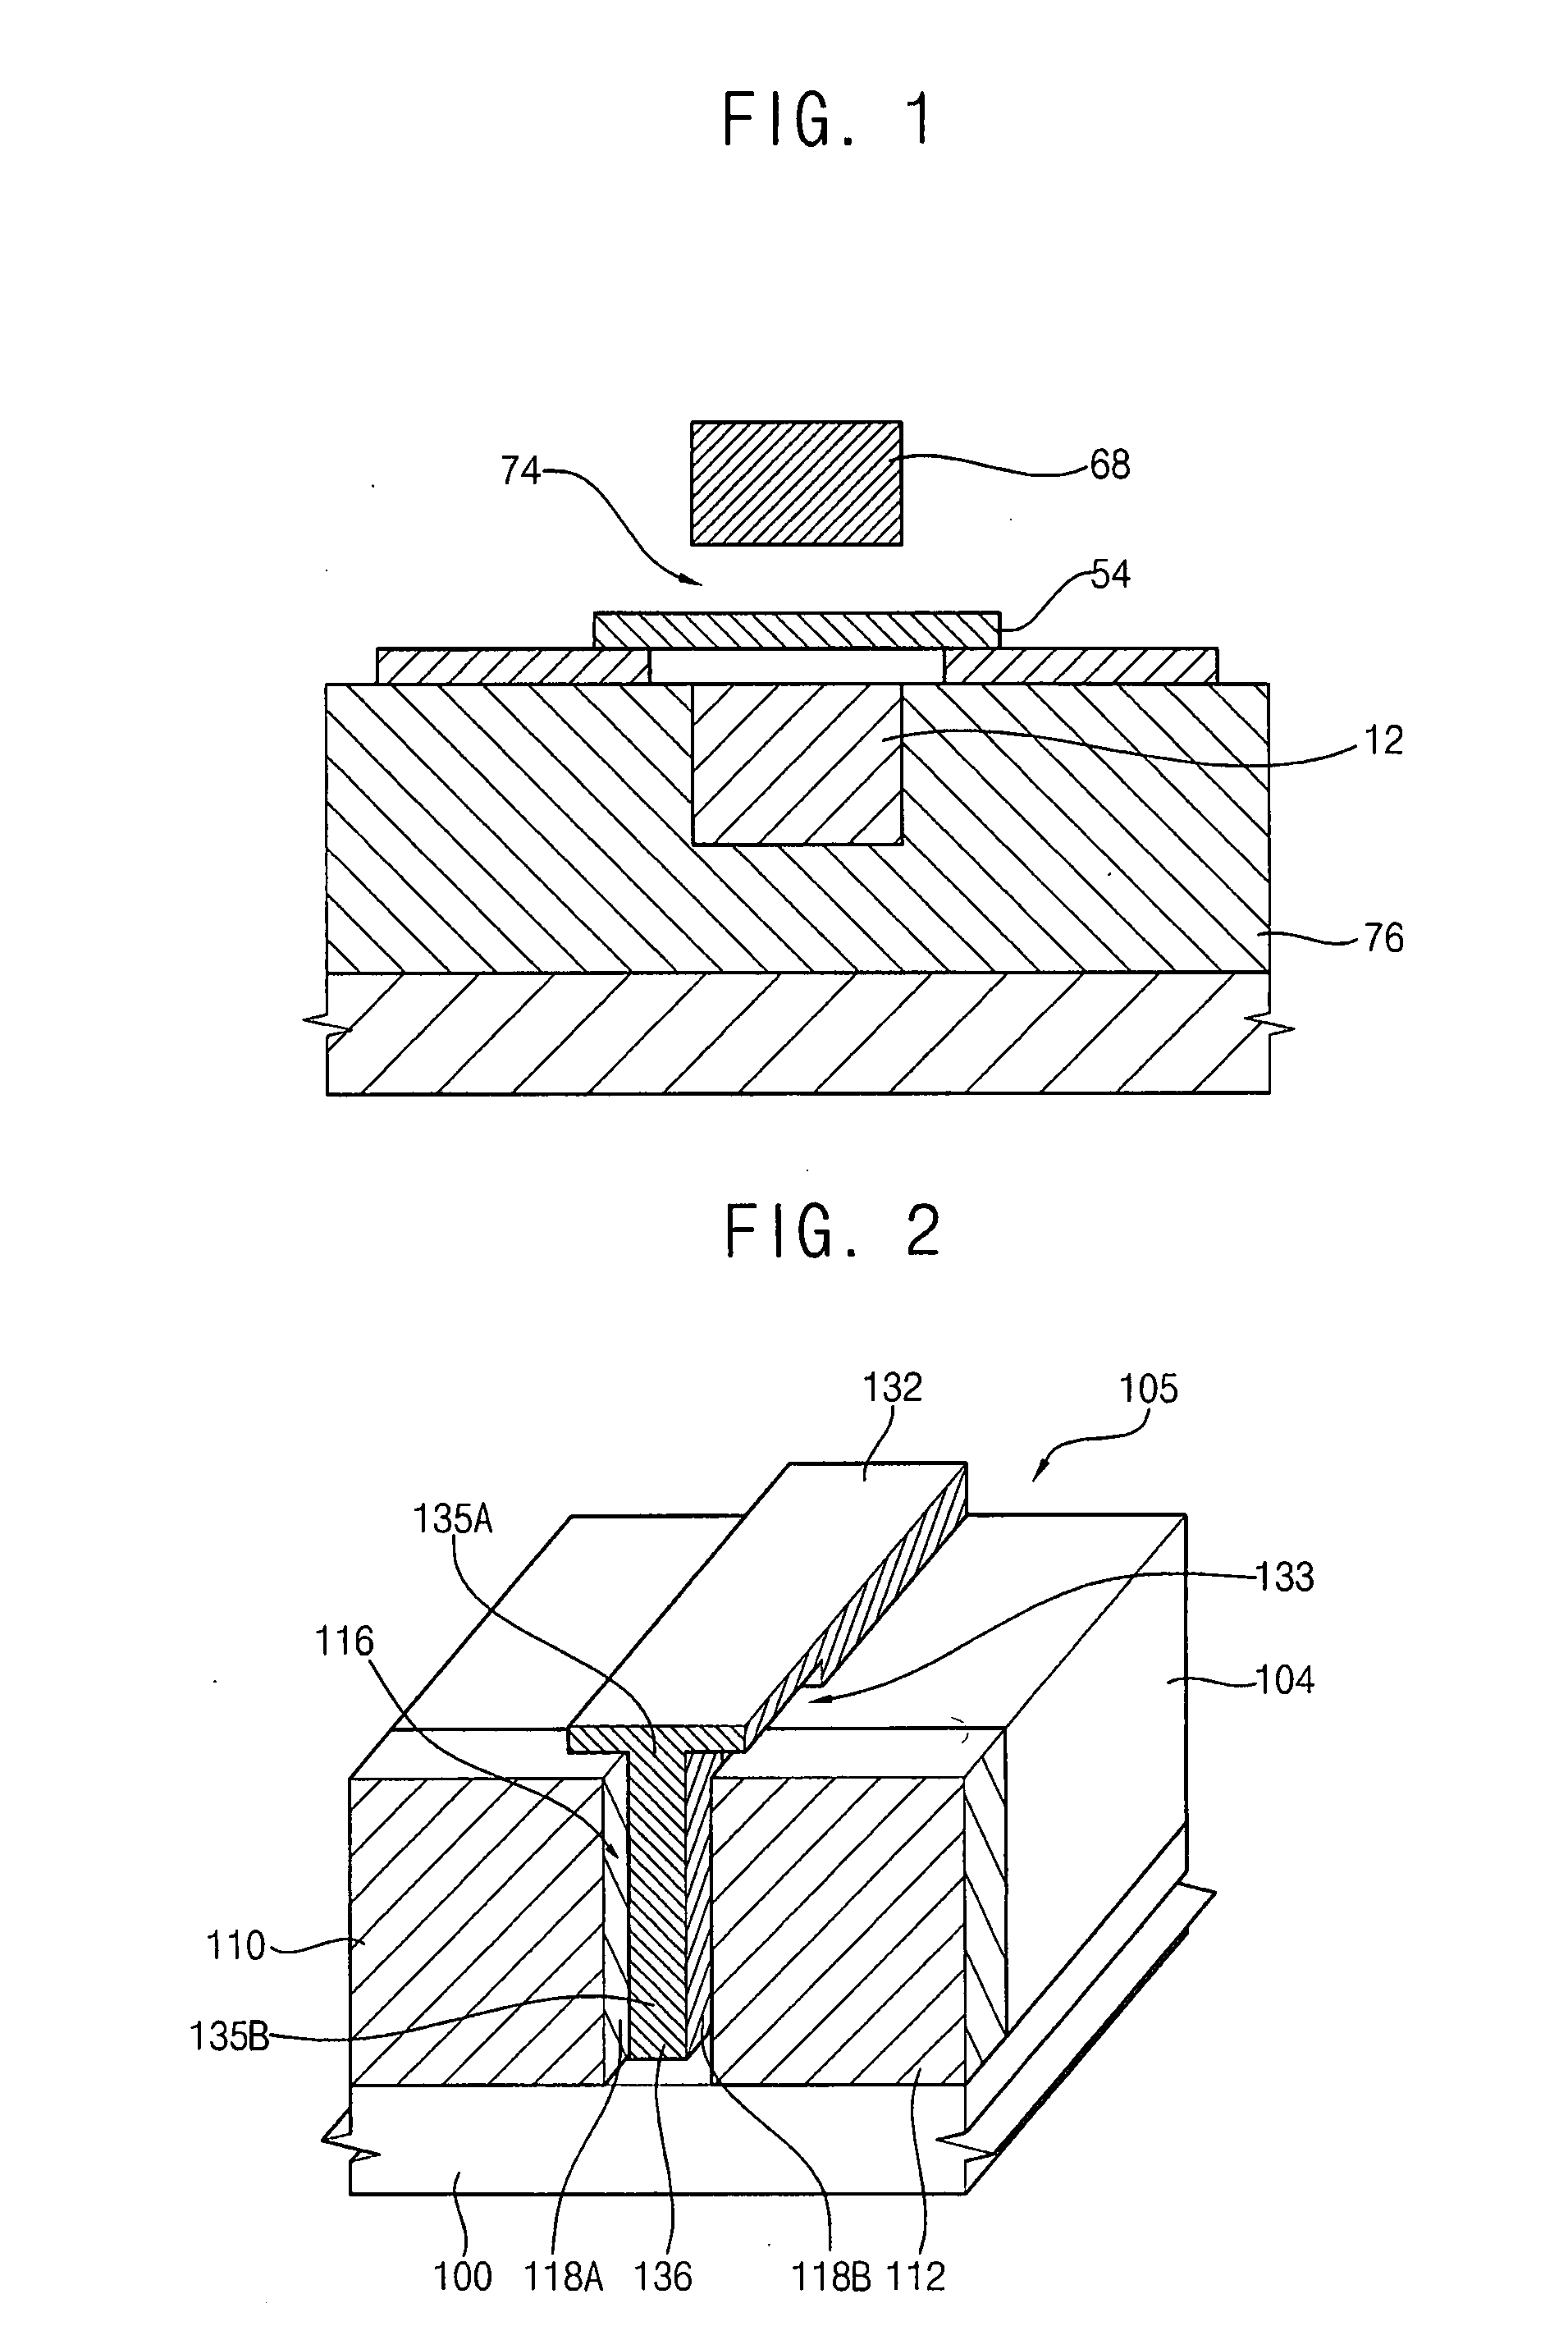 Vertical electromechanical memory devices and methods of manufacturing the same